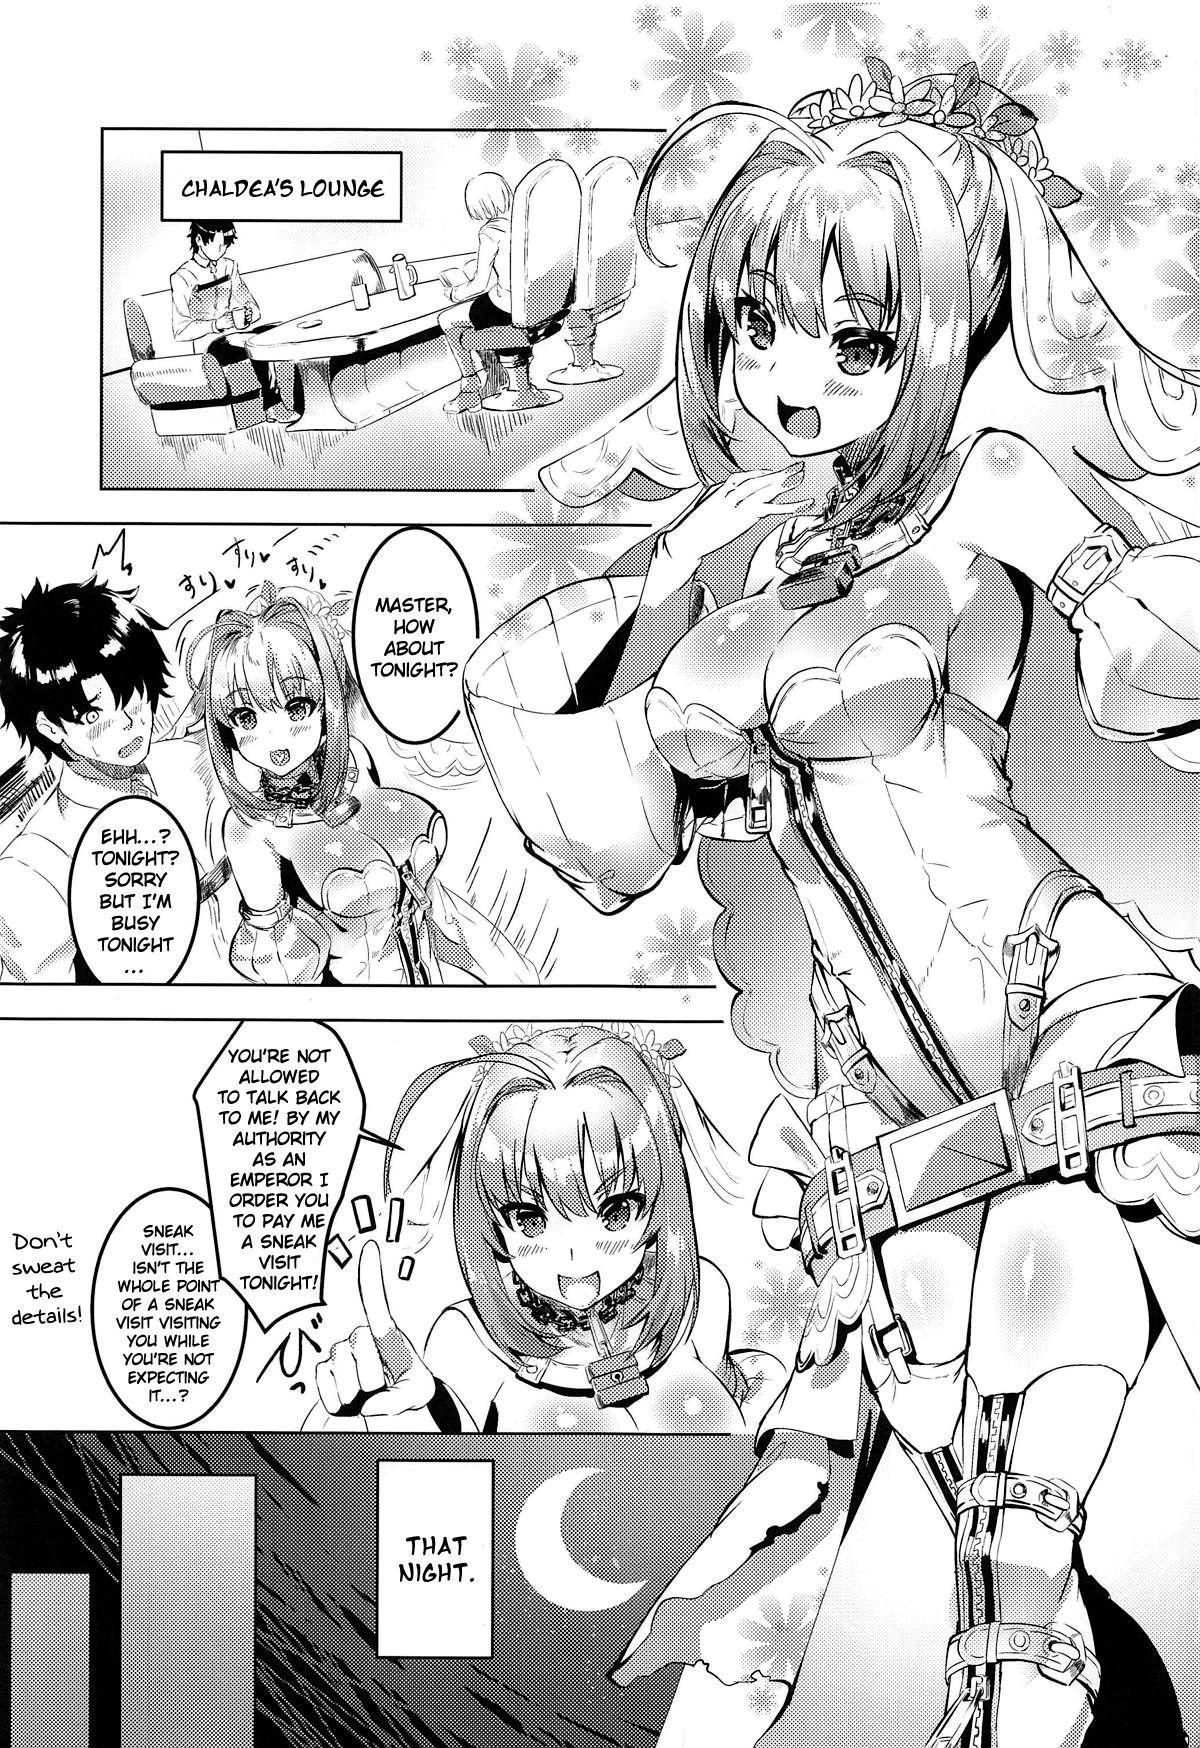 Office Sex Koutei to Oni no Erohon | An Ero Book About an Emperor and an Oni - Fate grand order Girls - Page 2